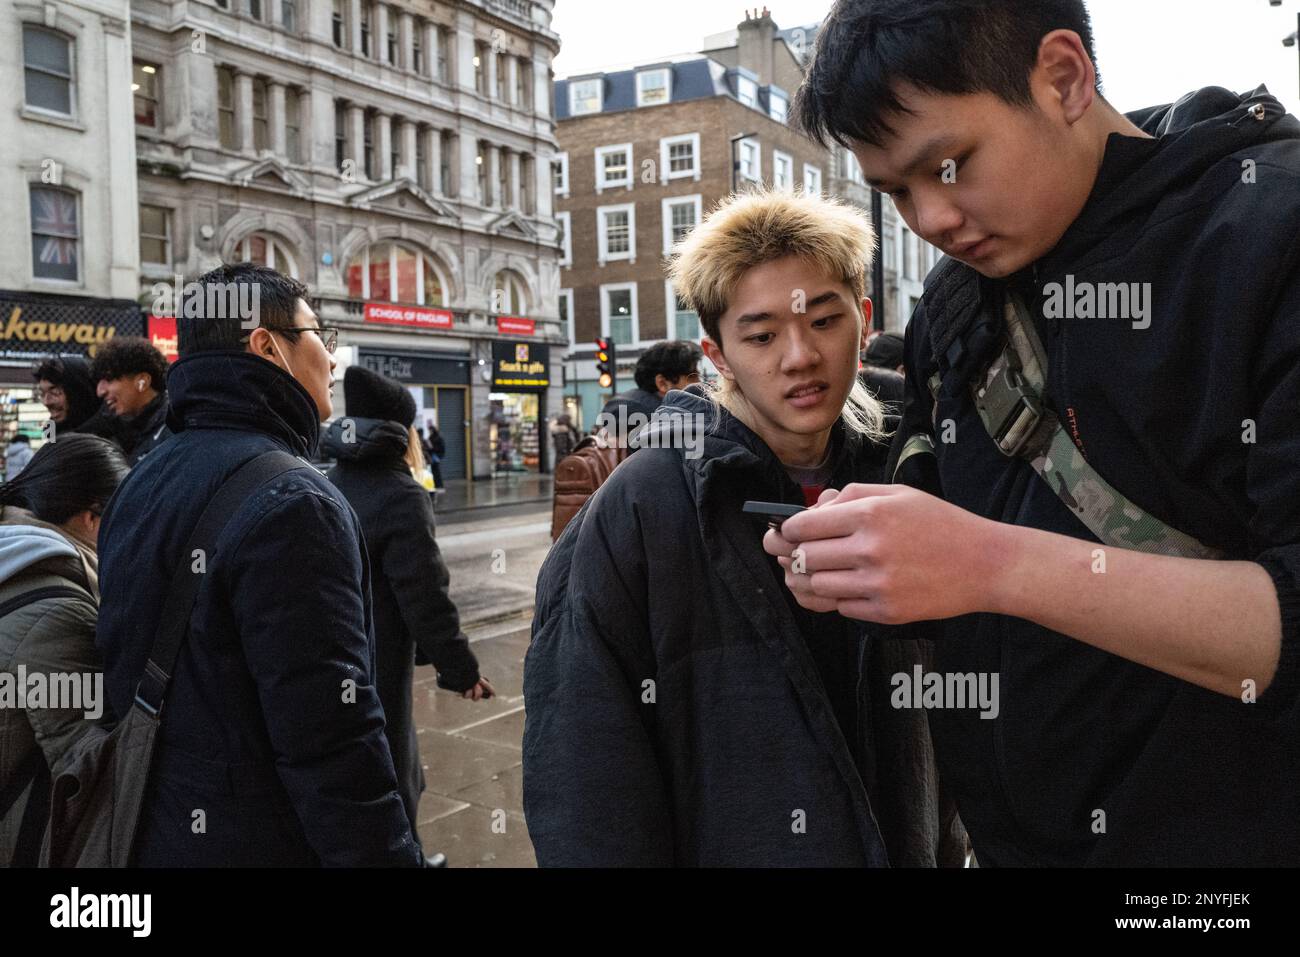 Two Asian males use a mobile/cell phone for information in city setting. London UK Stock Photo